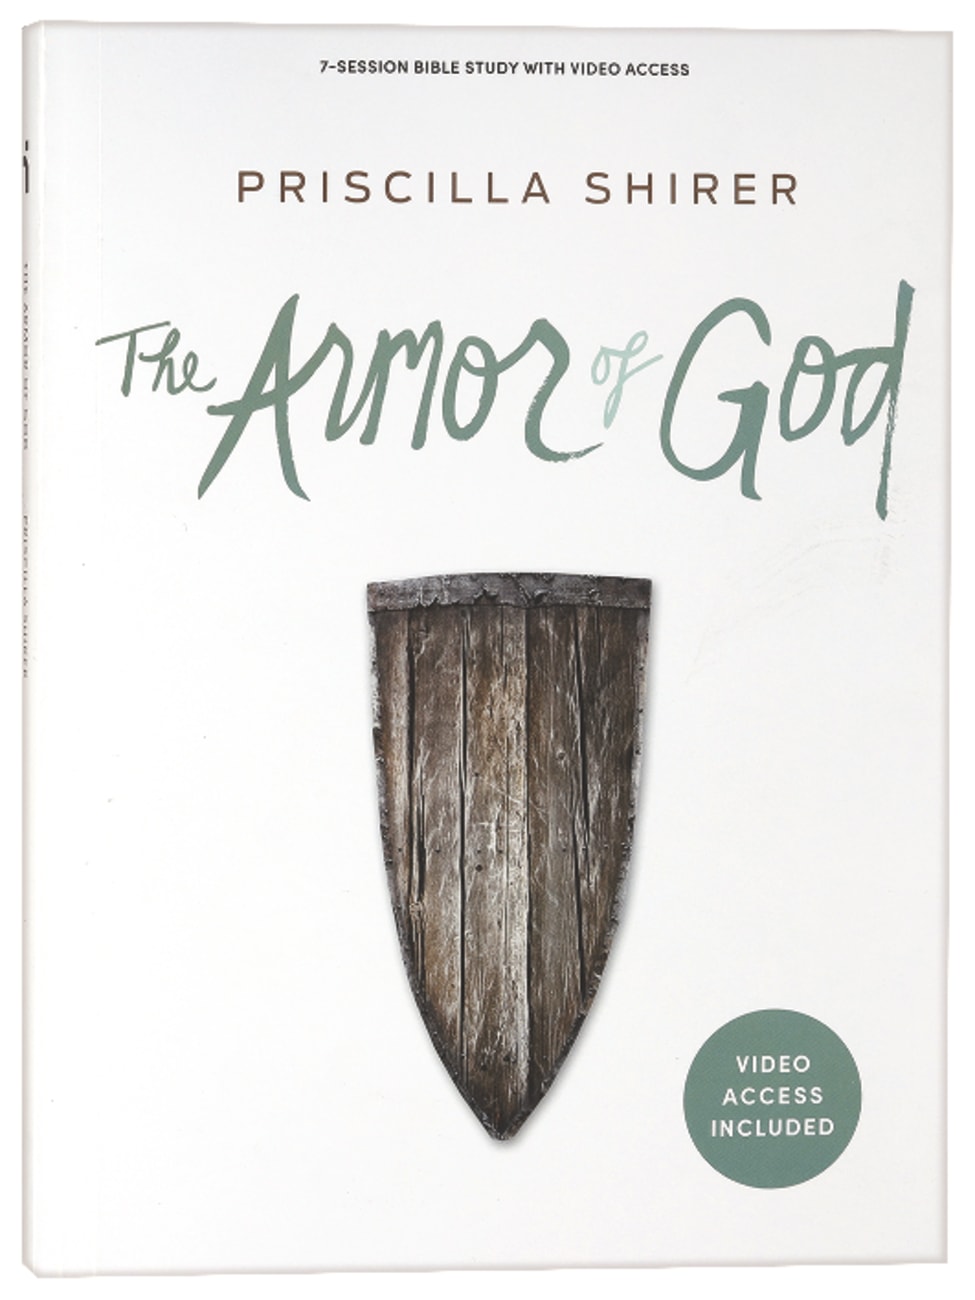 The Armor of God (Bible Study Book With Video Access) Paperback